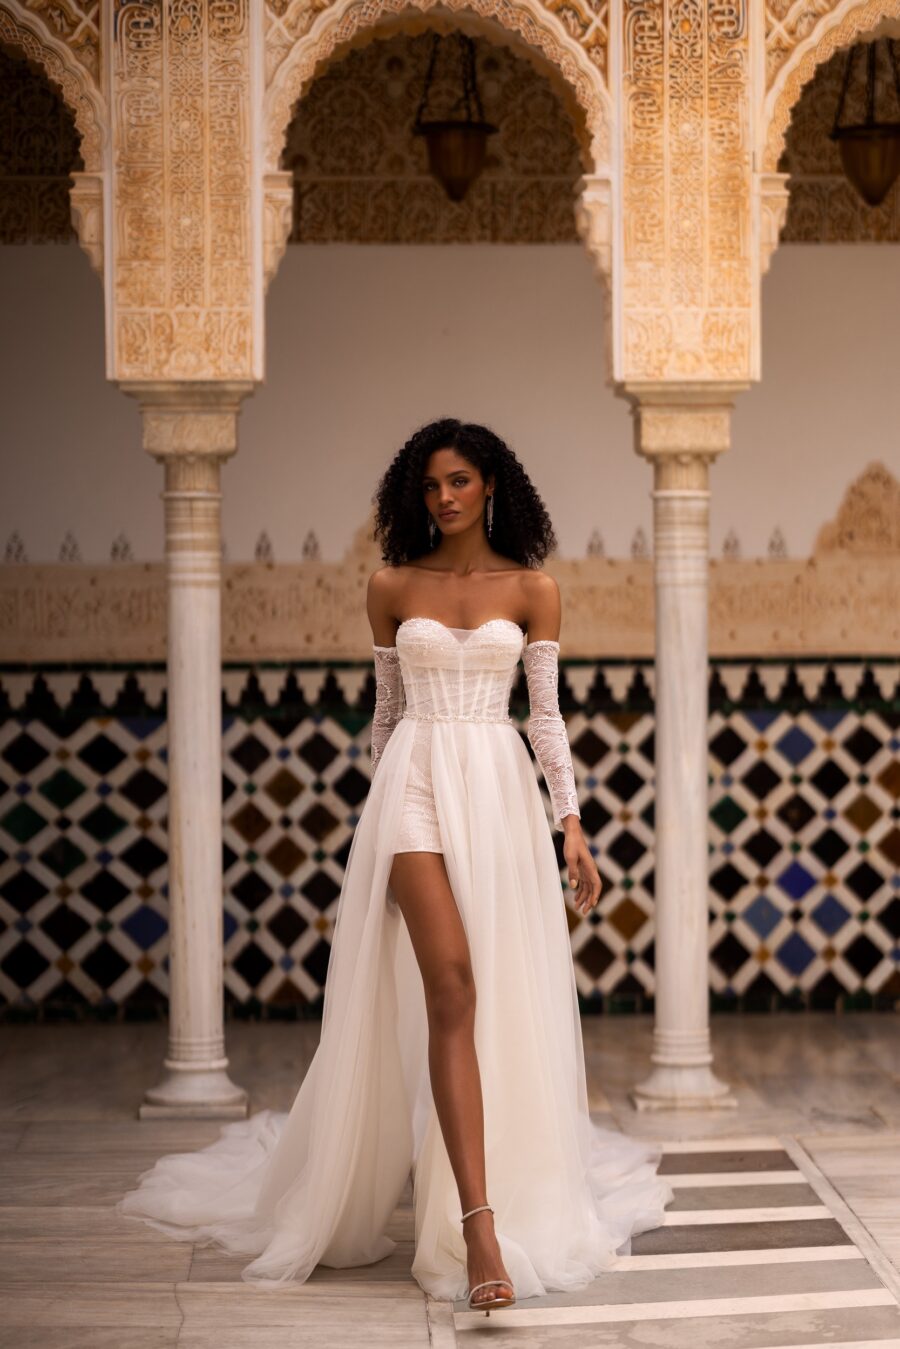 Havana 1 dress by wona concept from alma de oro collection